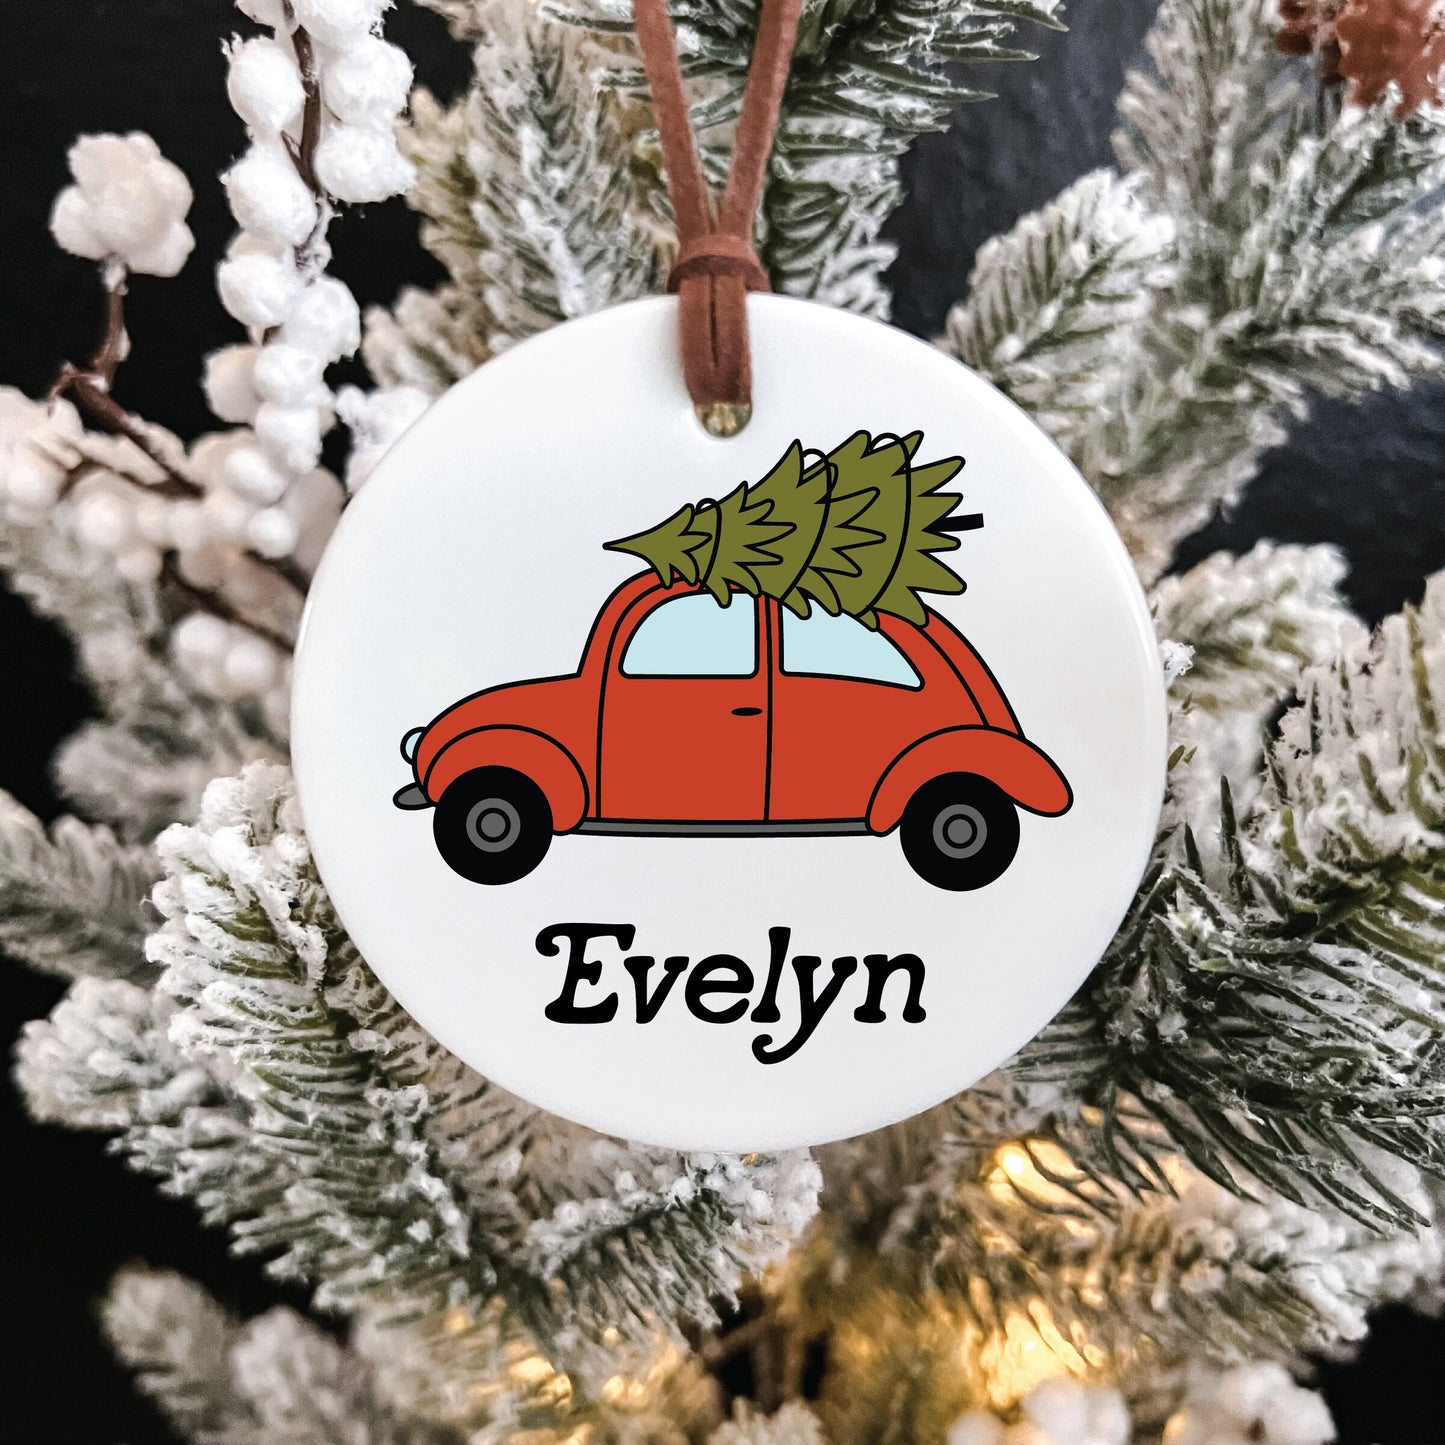 Christmas Ornament / Ceramic Porcelain Ornament / Baby Birth Stats / Personalized Newborn Ornament / Gift for New Parents / Red VW Buggy